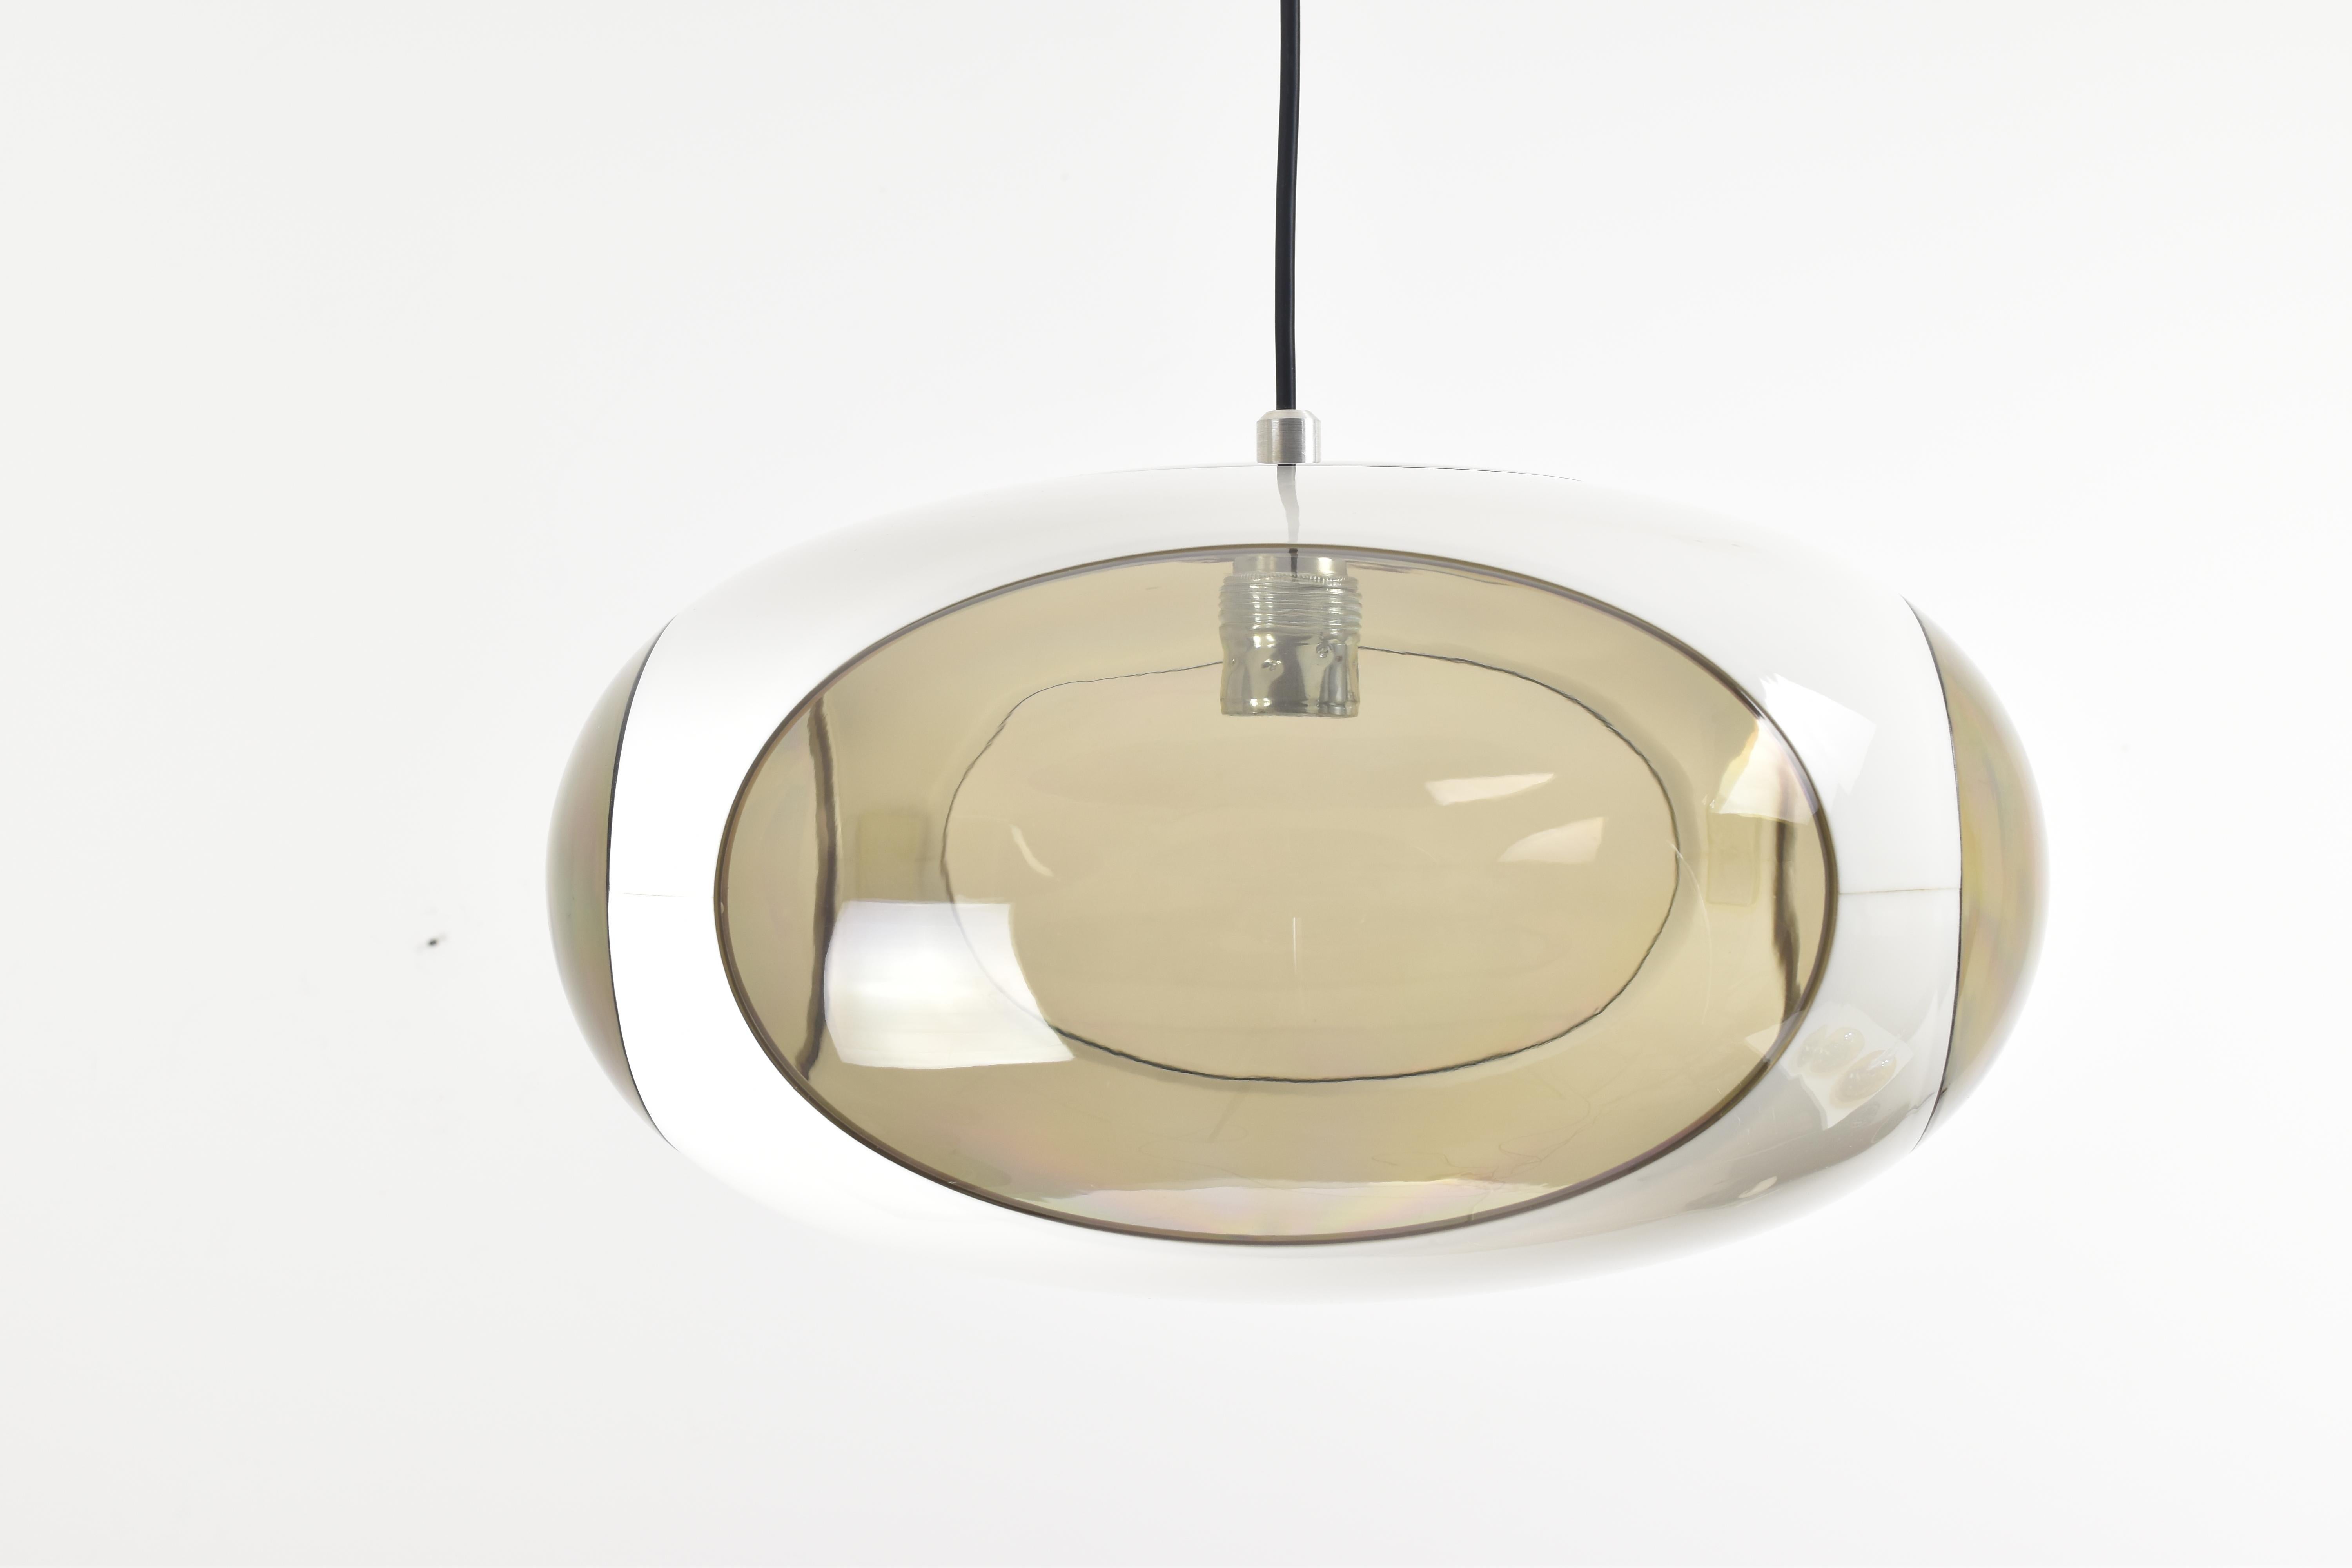 The vintage white UFO pendant lamp, designed by Luigi Colani for Massive Belgium, is a striking and iconic piece of lighting design that reflects both the innovative creativity of the designer and the quality craftsmanship associated with the